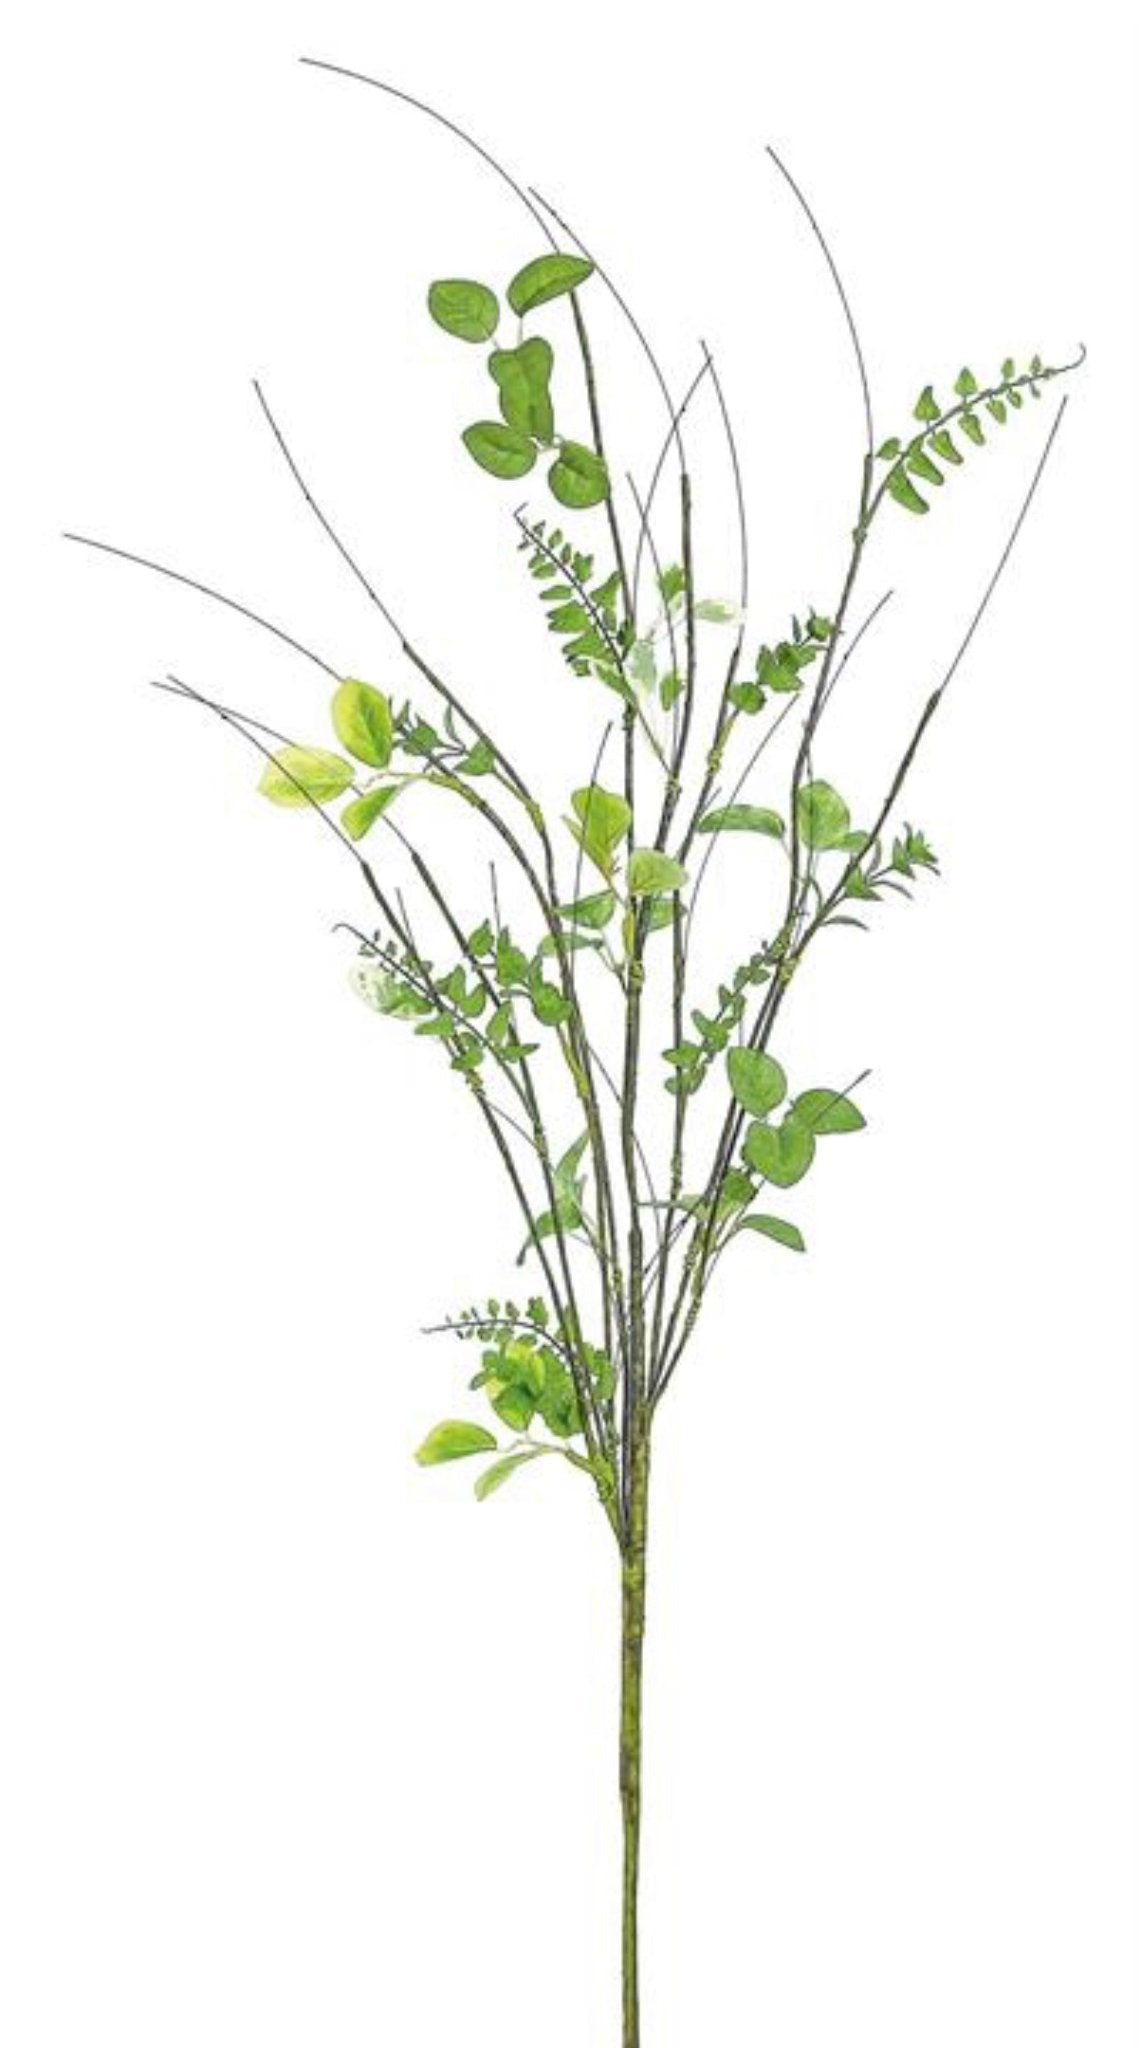 Artificial milled foliage and twig spray - Greenery MarketPm2922